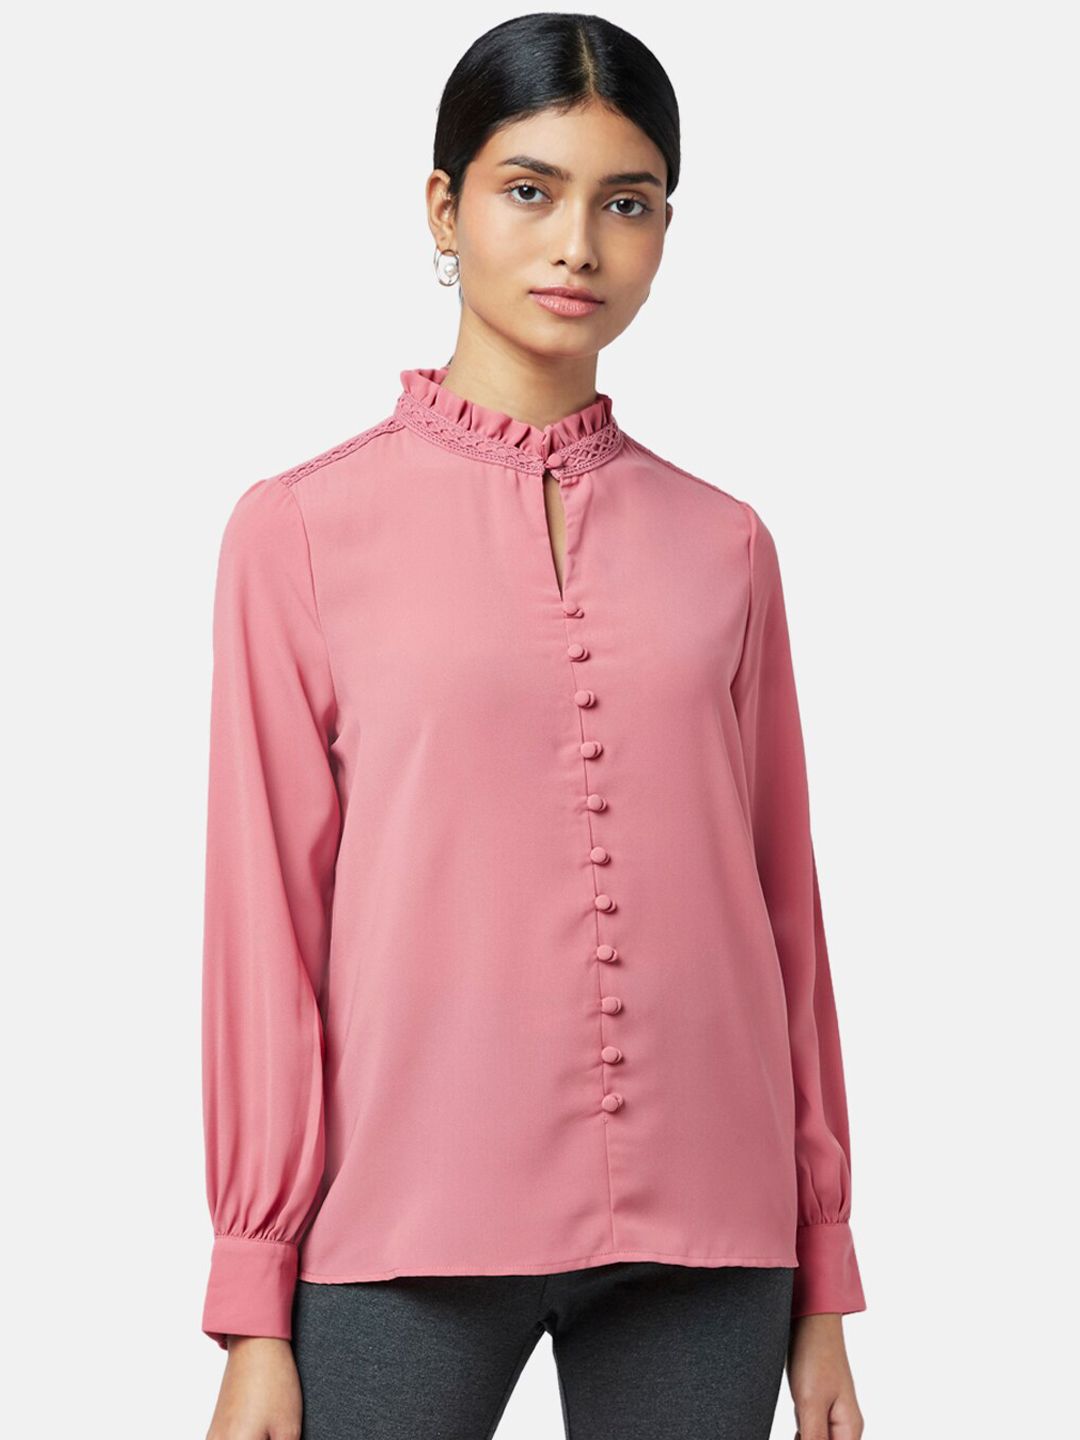 Annabelle by Pantaloons Pink Solid Shirt Style Top Price in India